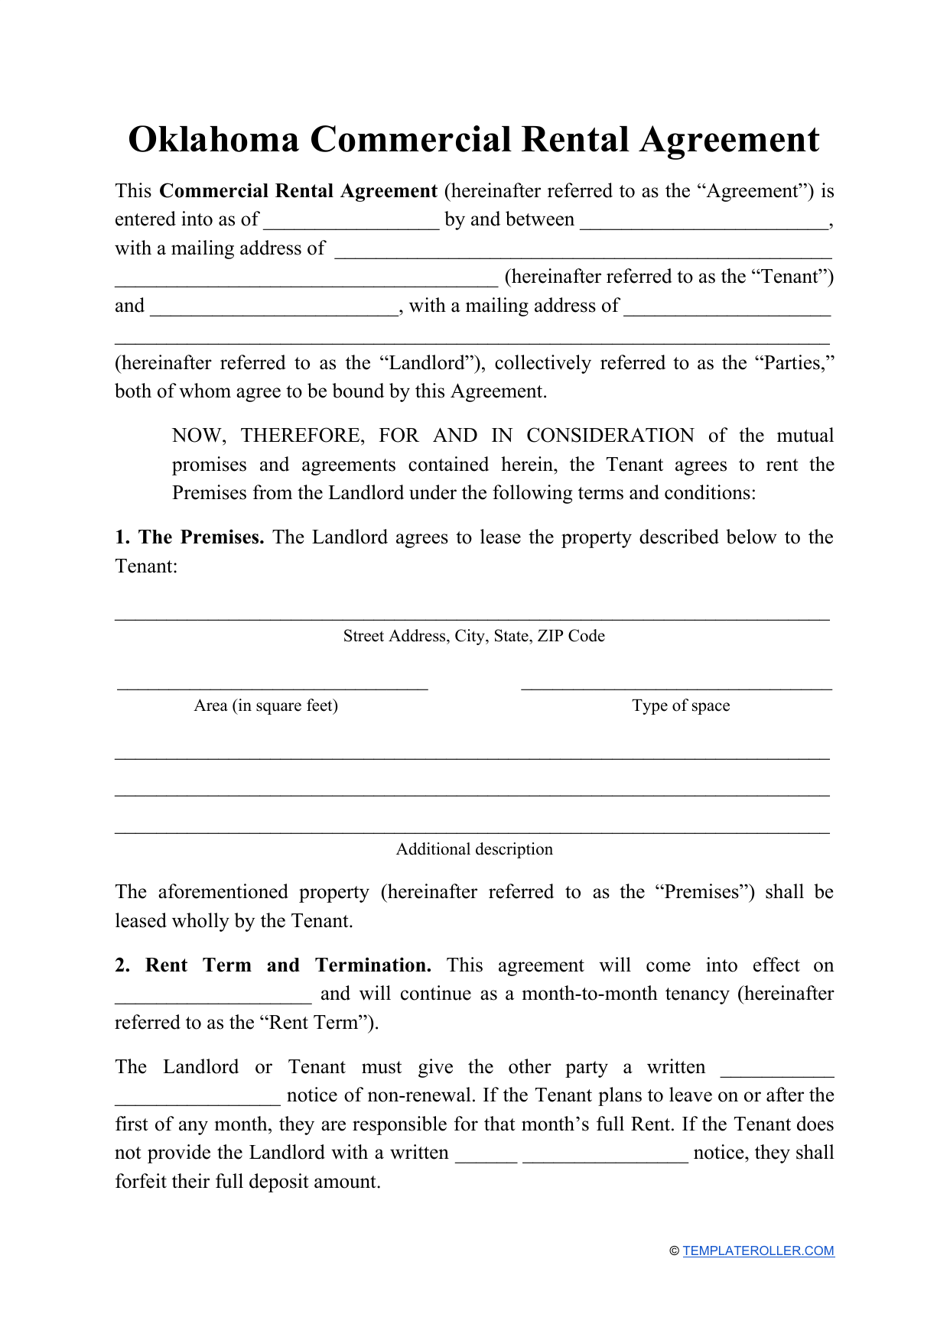 Commercial Rental Agreement Template - Oklahoma, Page 1